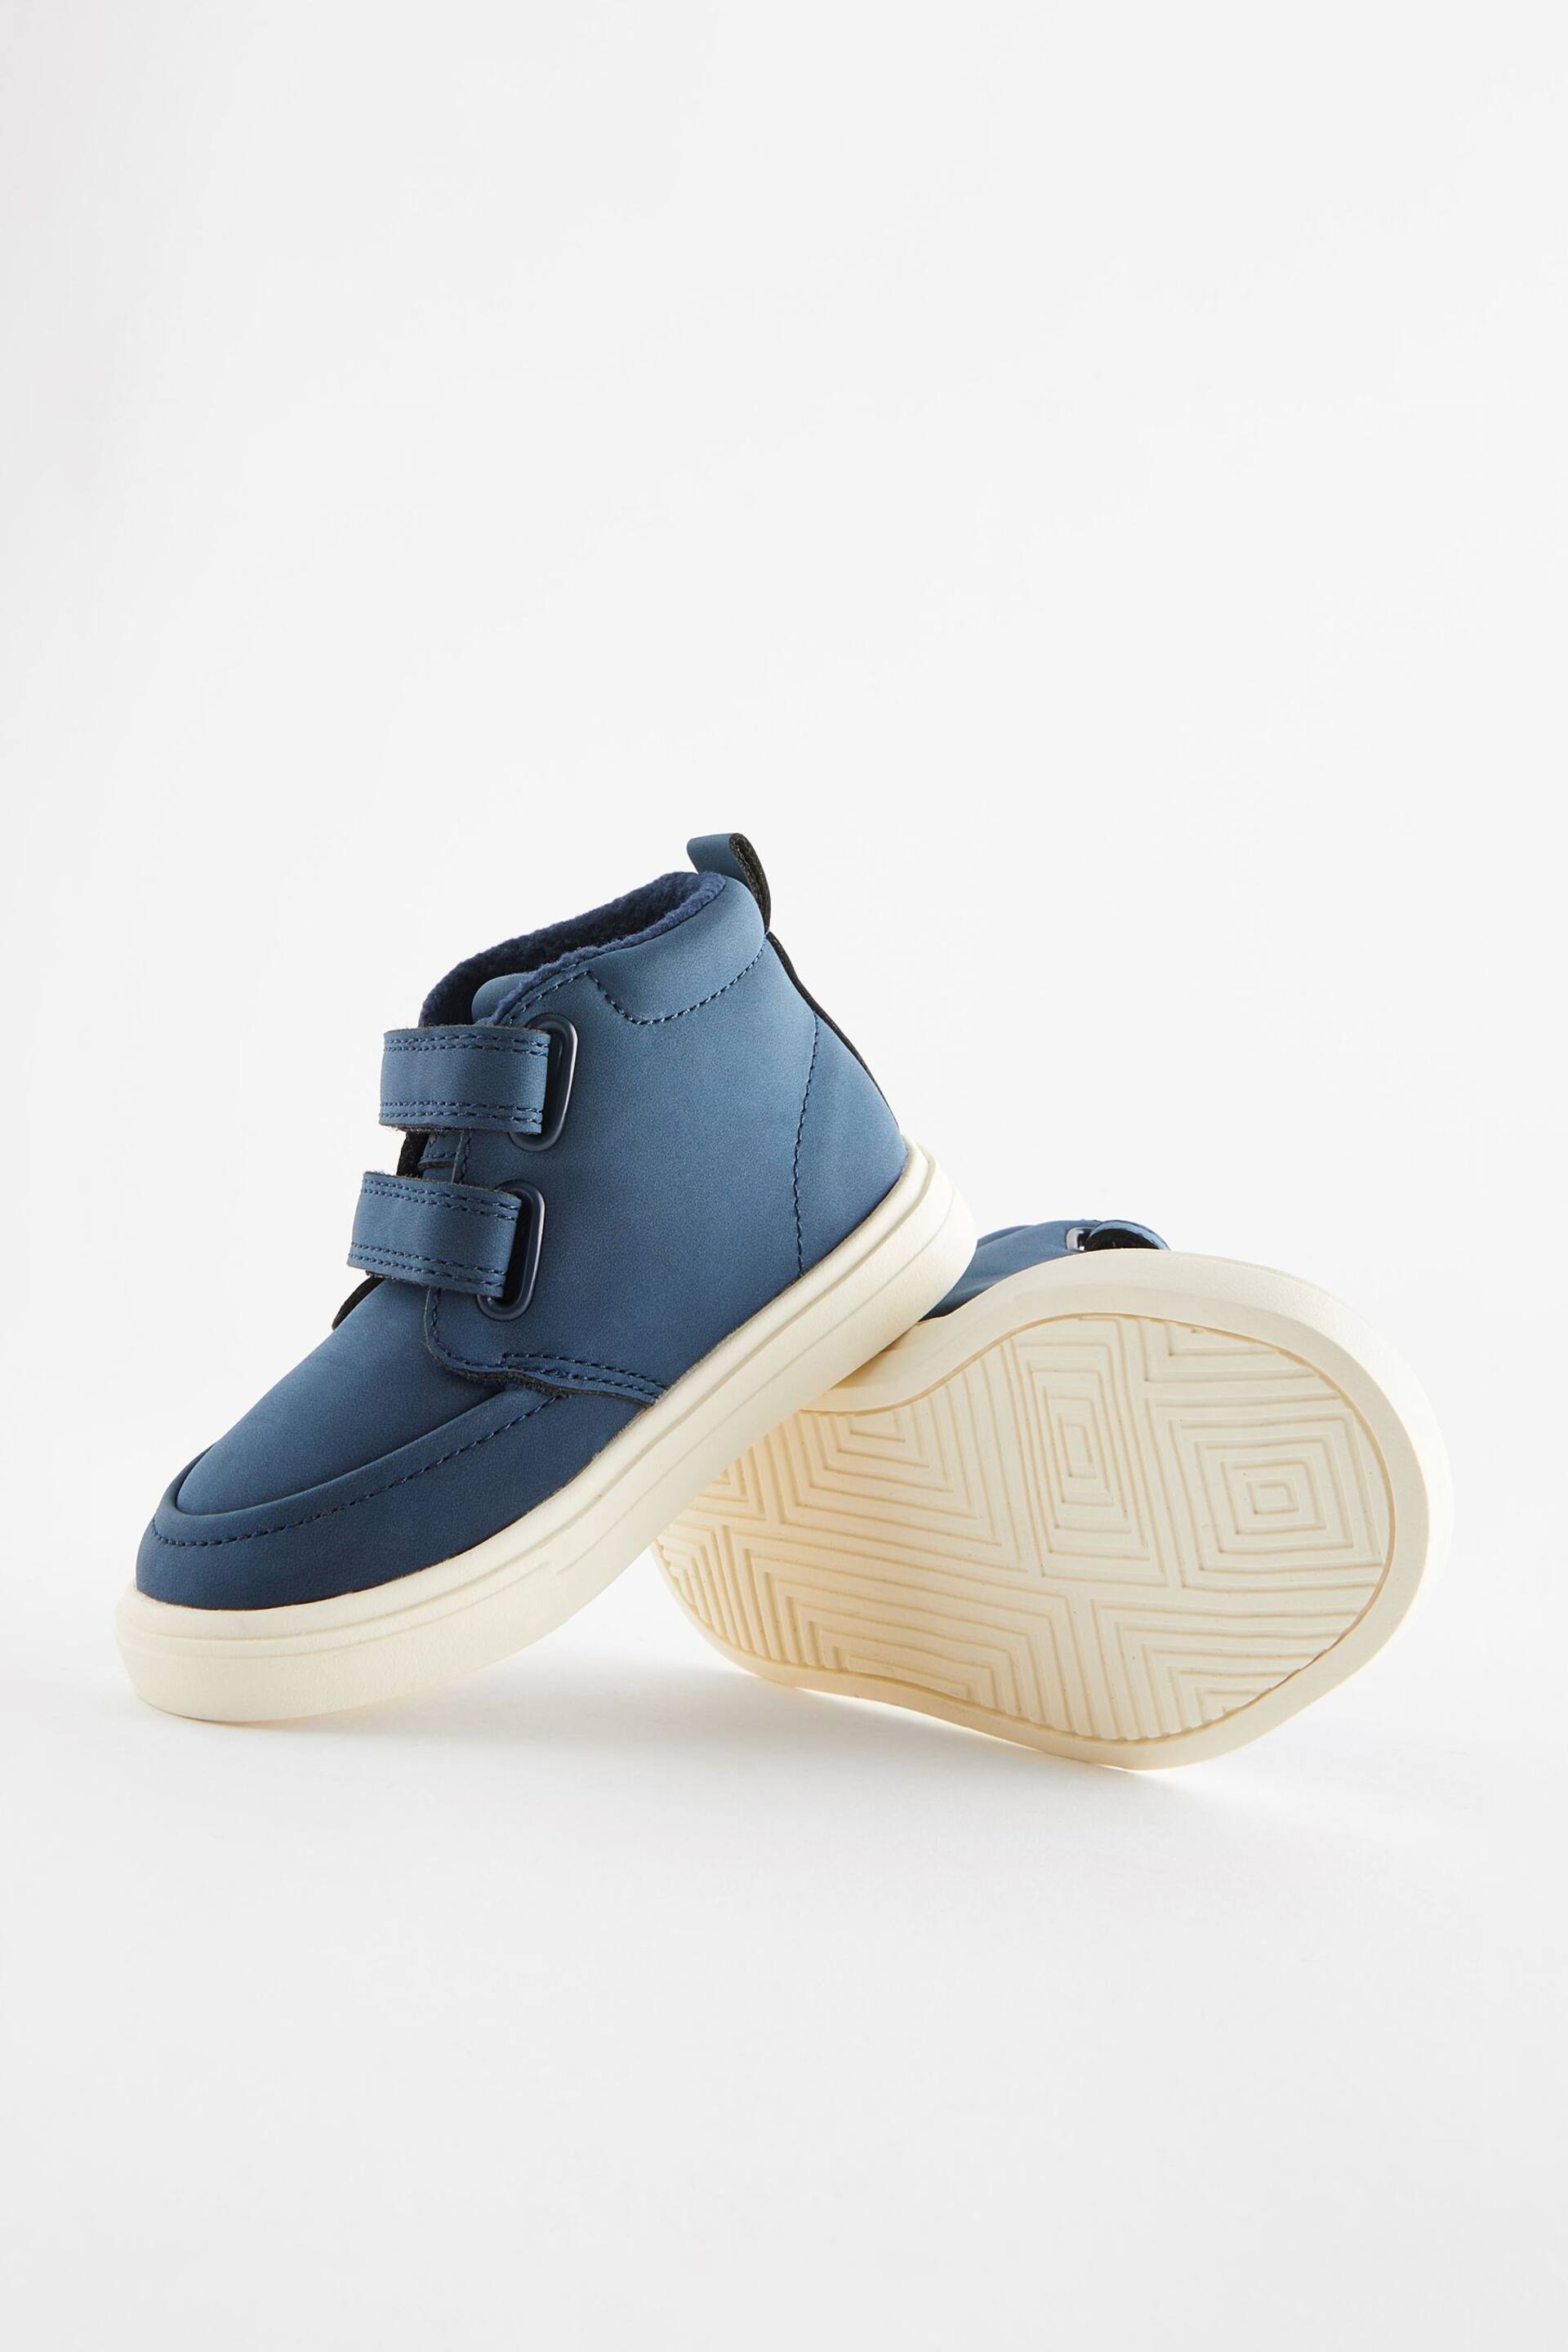 Navy Blue With Off White Sole Wide Fit (G) Warm Lined Touch Fastening Boots - Image 4 of 5